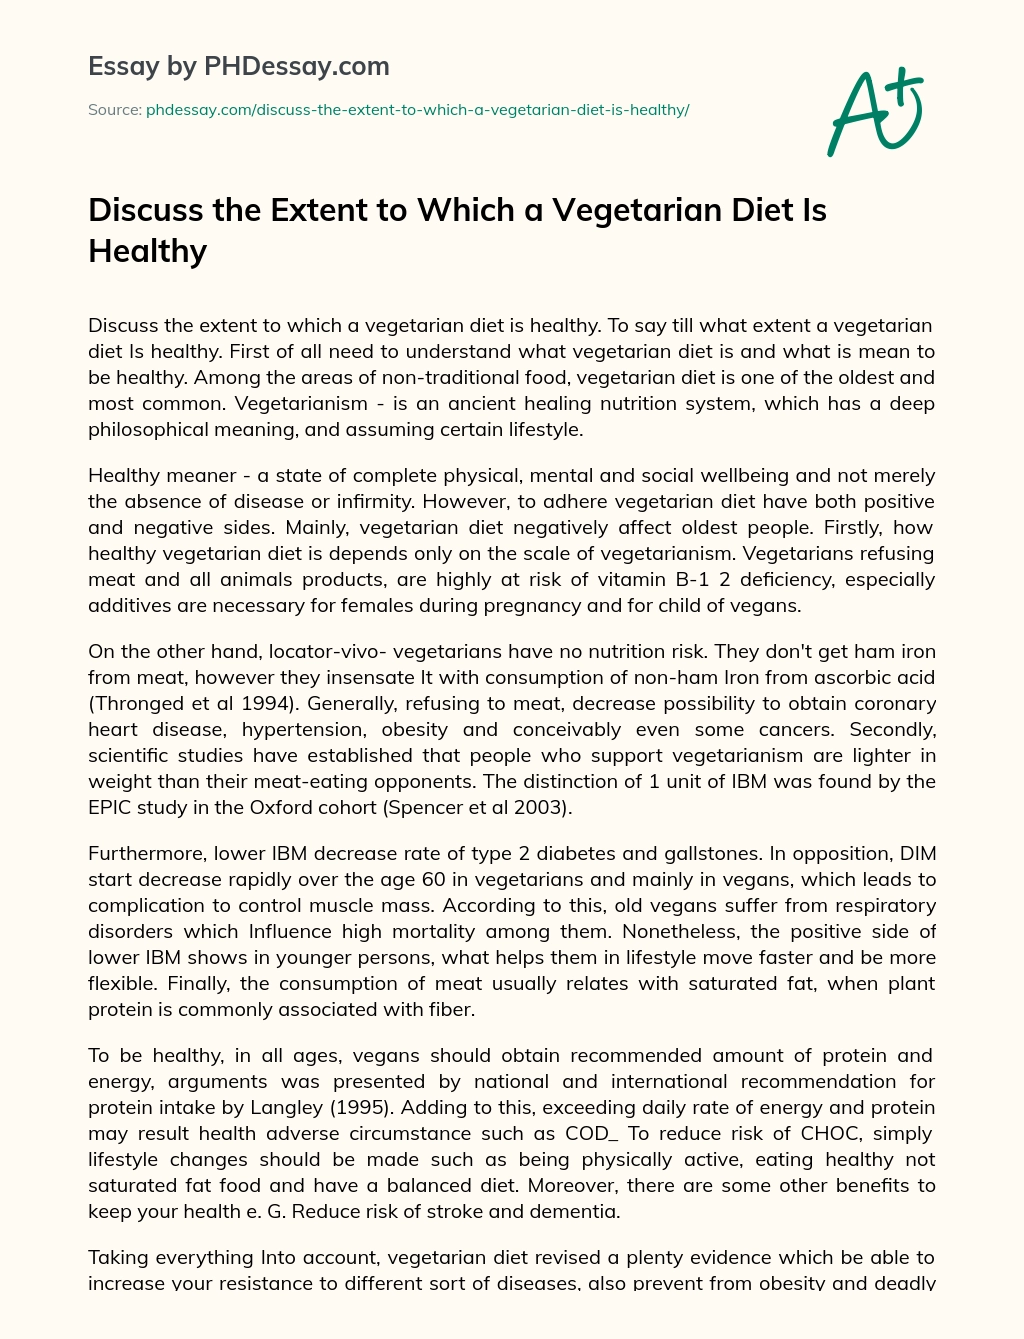 Discuss the Extent to Which a Vegetarian Diet Is Healthy essay